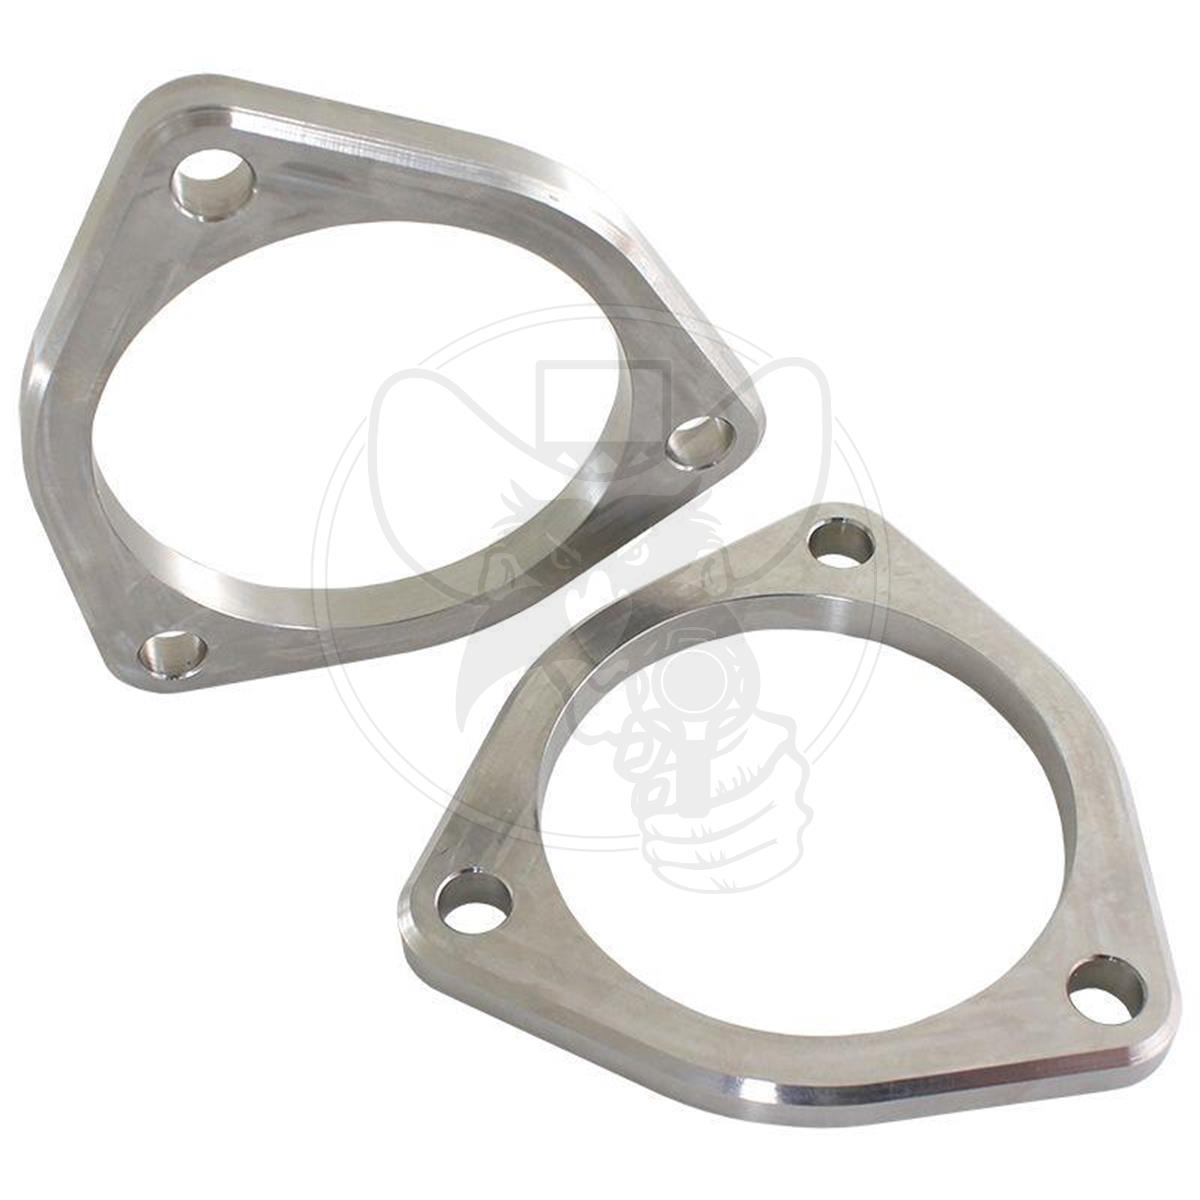 AEROFLOW 4-BOLT STAINLESS EXHAUST FLANGE 4.0" ID X 3/8" THICK